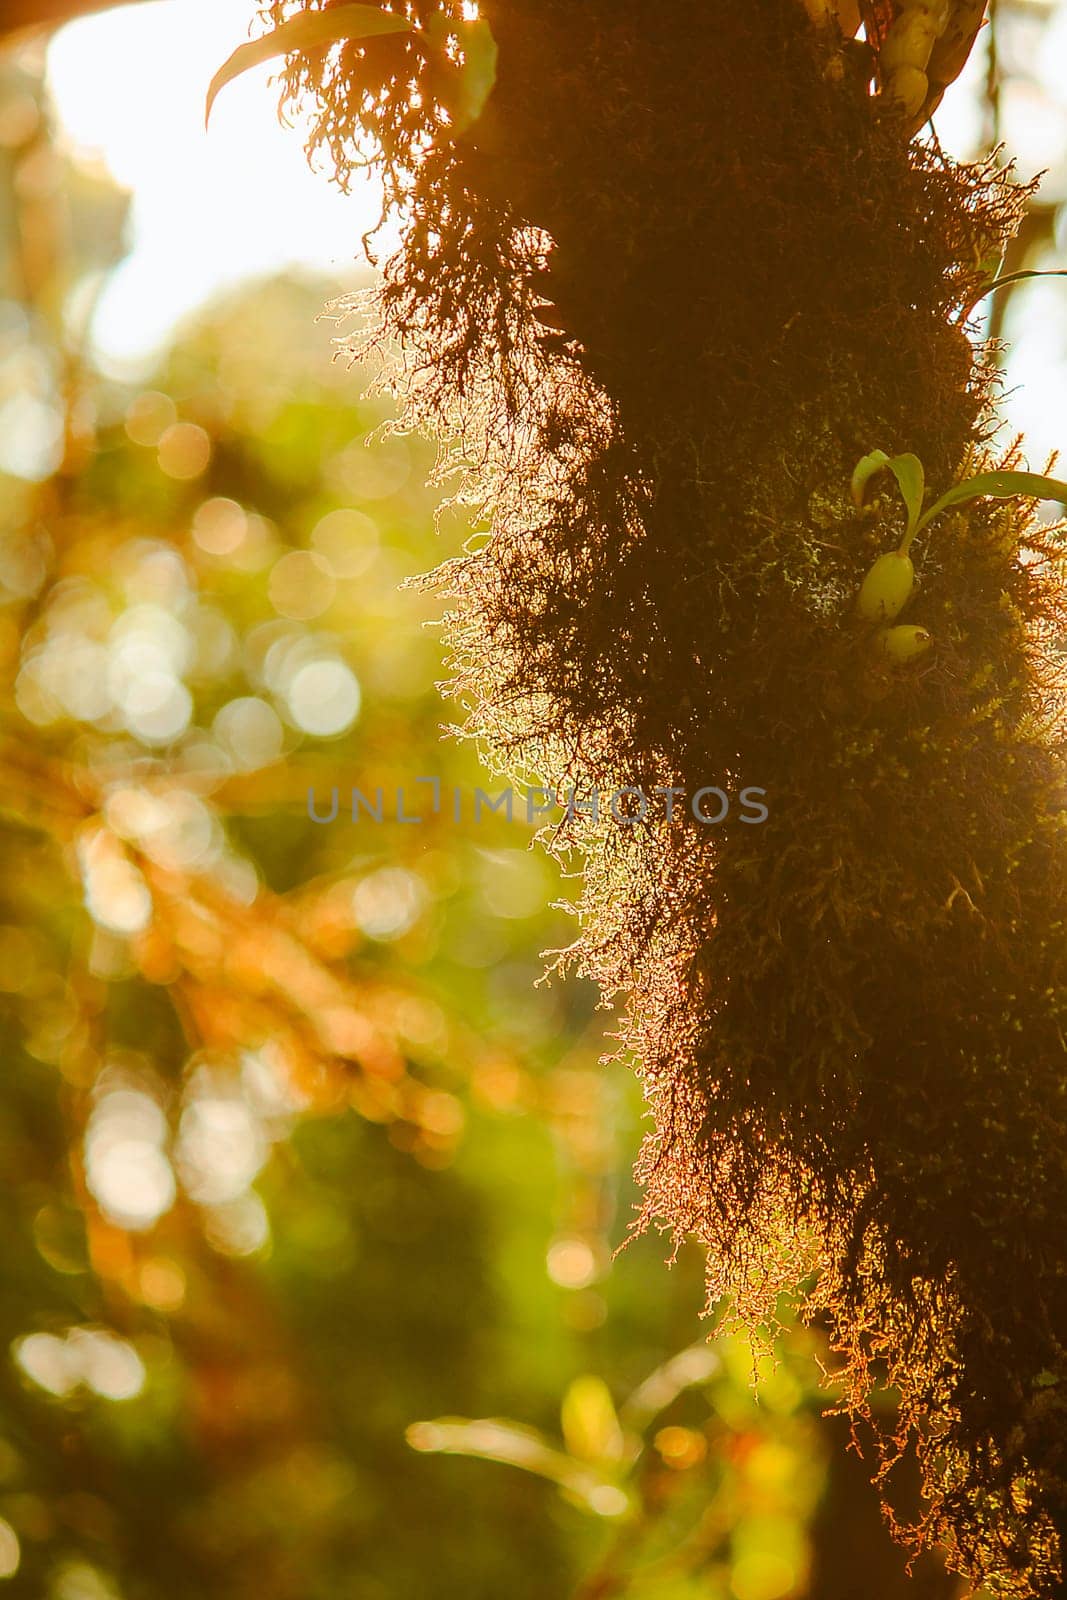 The sunrise light that shines on Moss on the tree